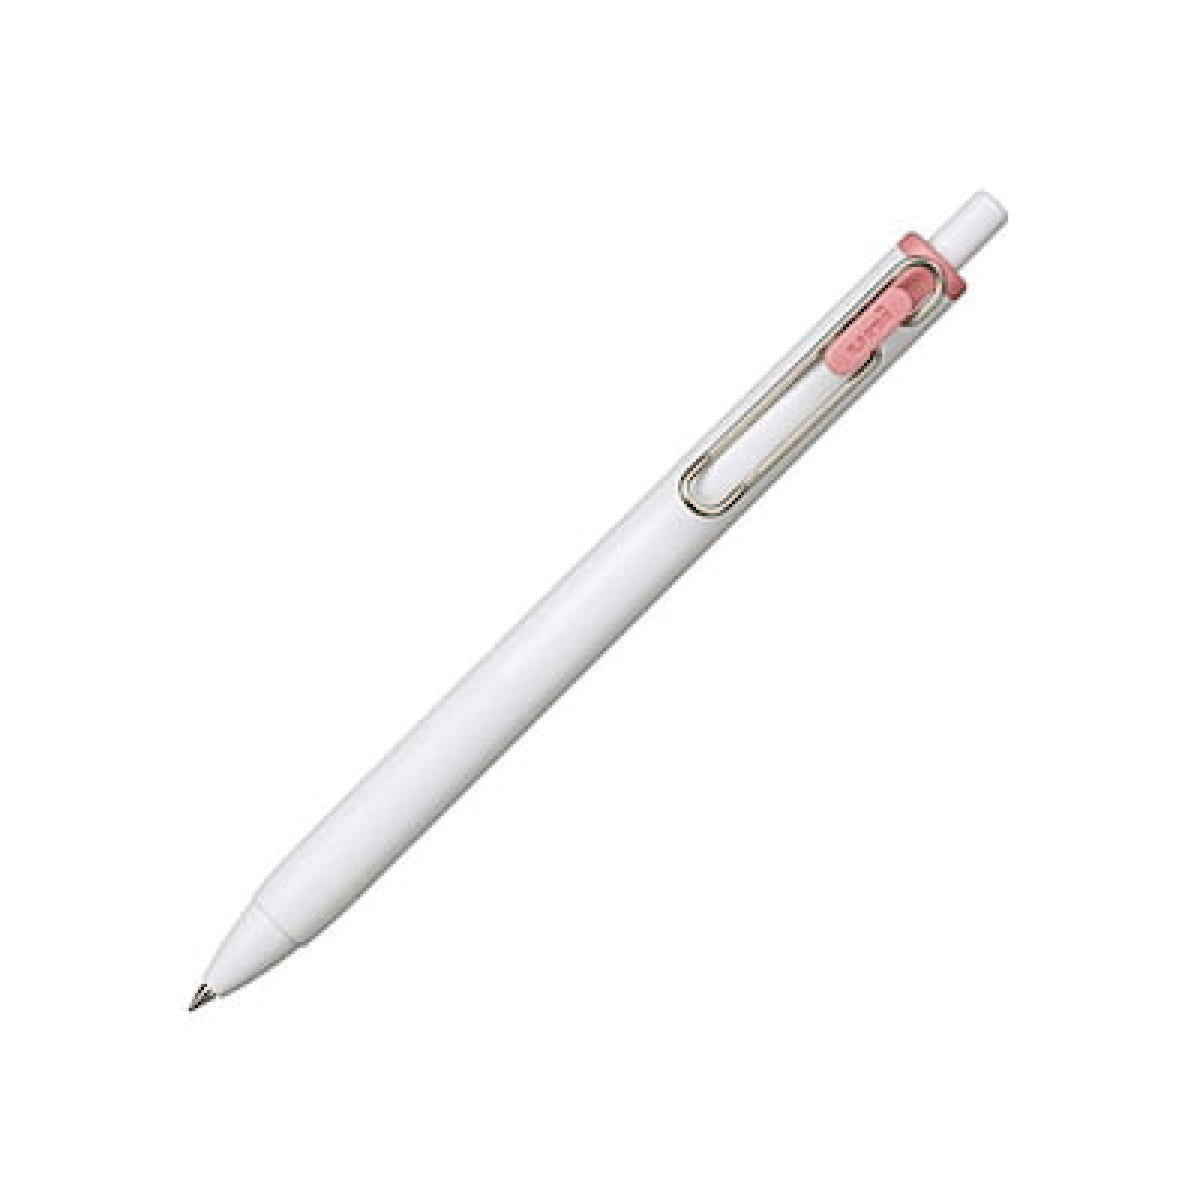 Single Poppy Red pen with white barrel and clip in red to match the pen ink color